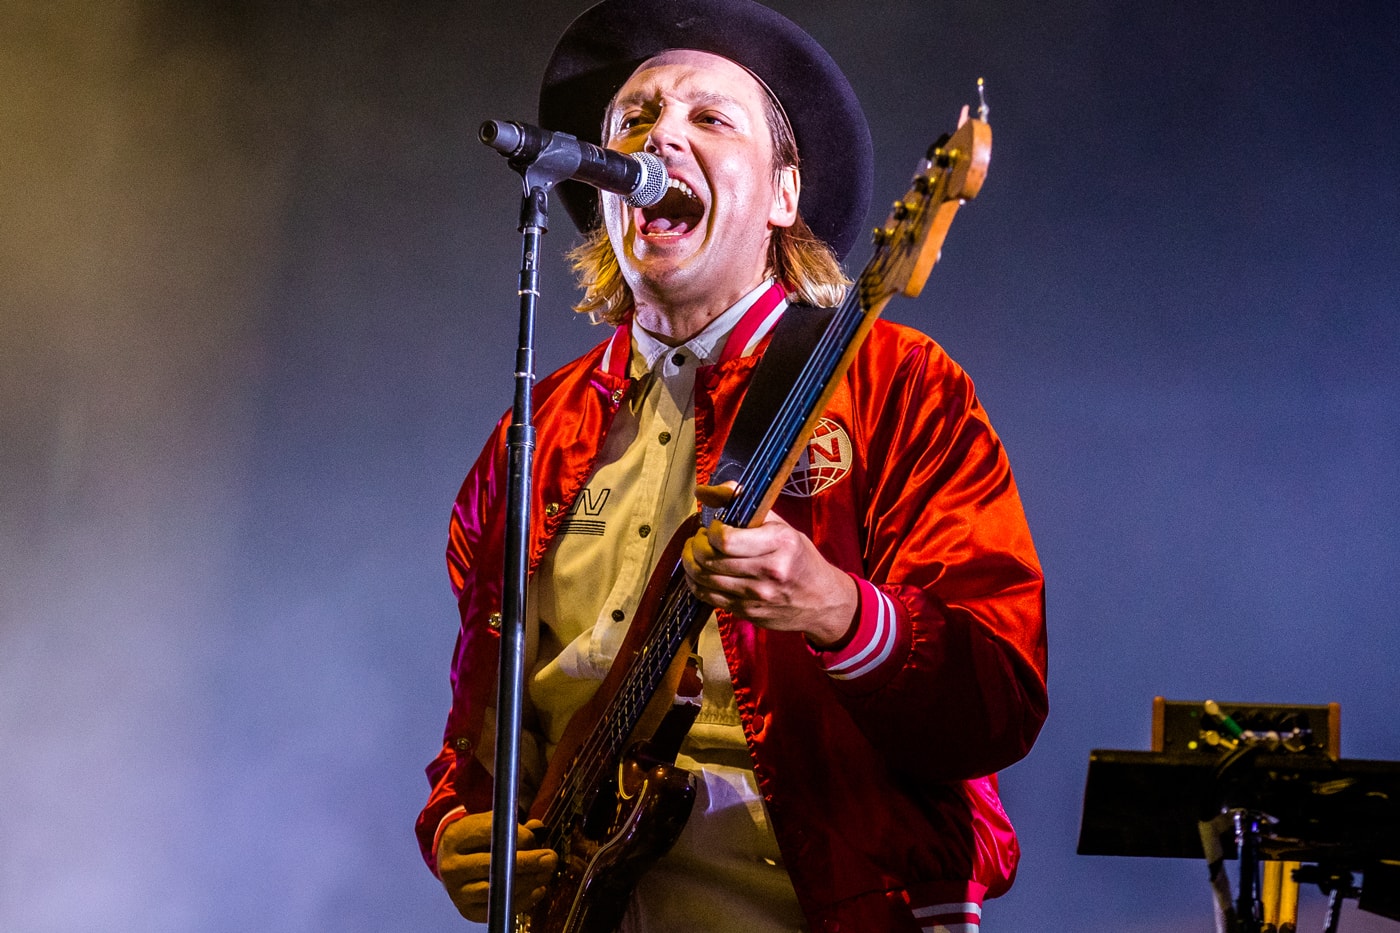 Arcade Fire's Will Butler Independence Day "Anything You Want" Track July 4th